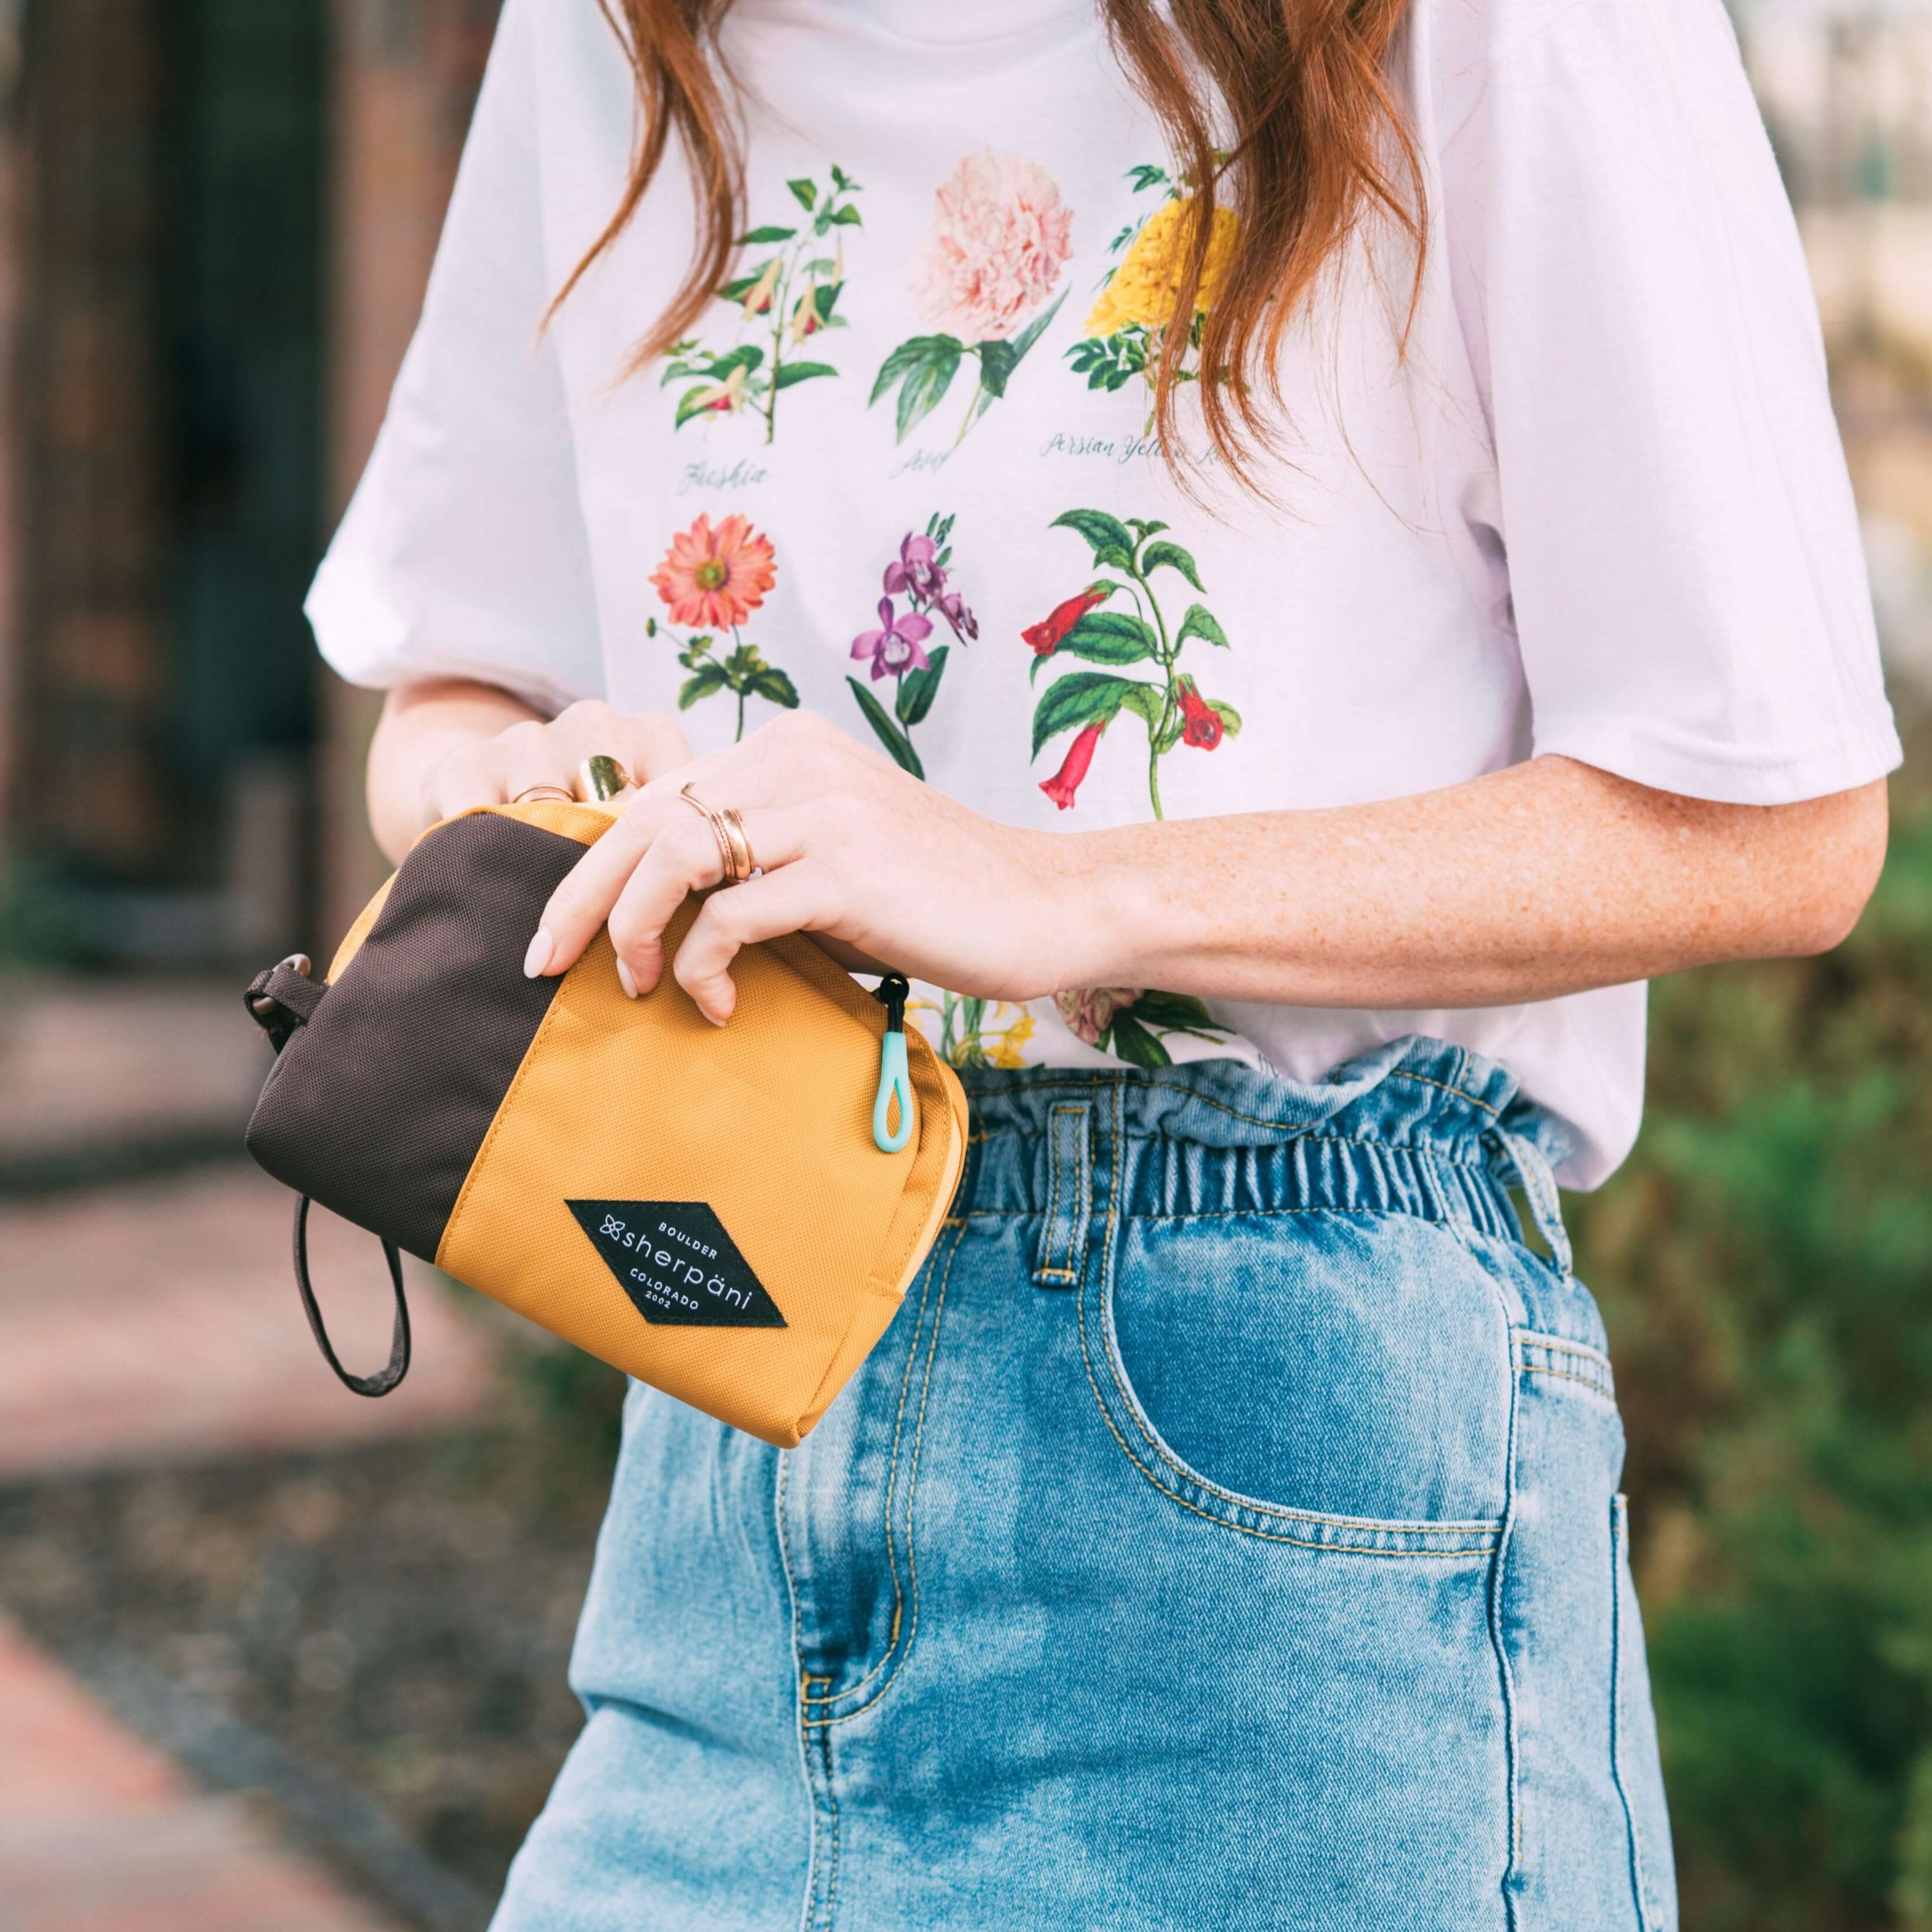 A red haired woman stands outside. She is wearing a white shirt with flowers and jeans. She is opening Sherpani travel accessory, the Jolie in Sundial.